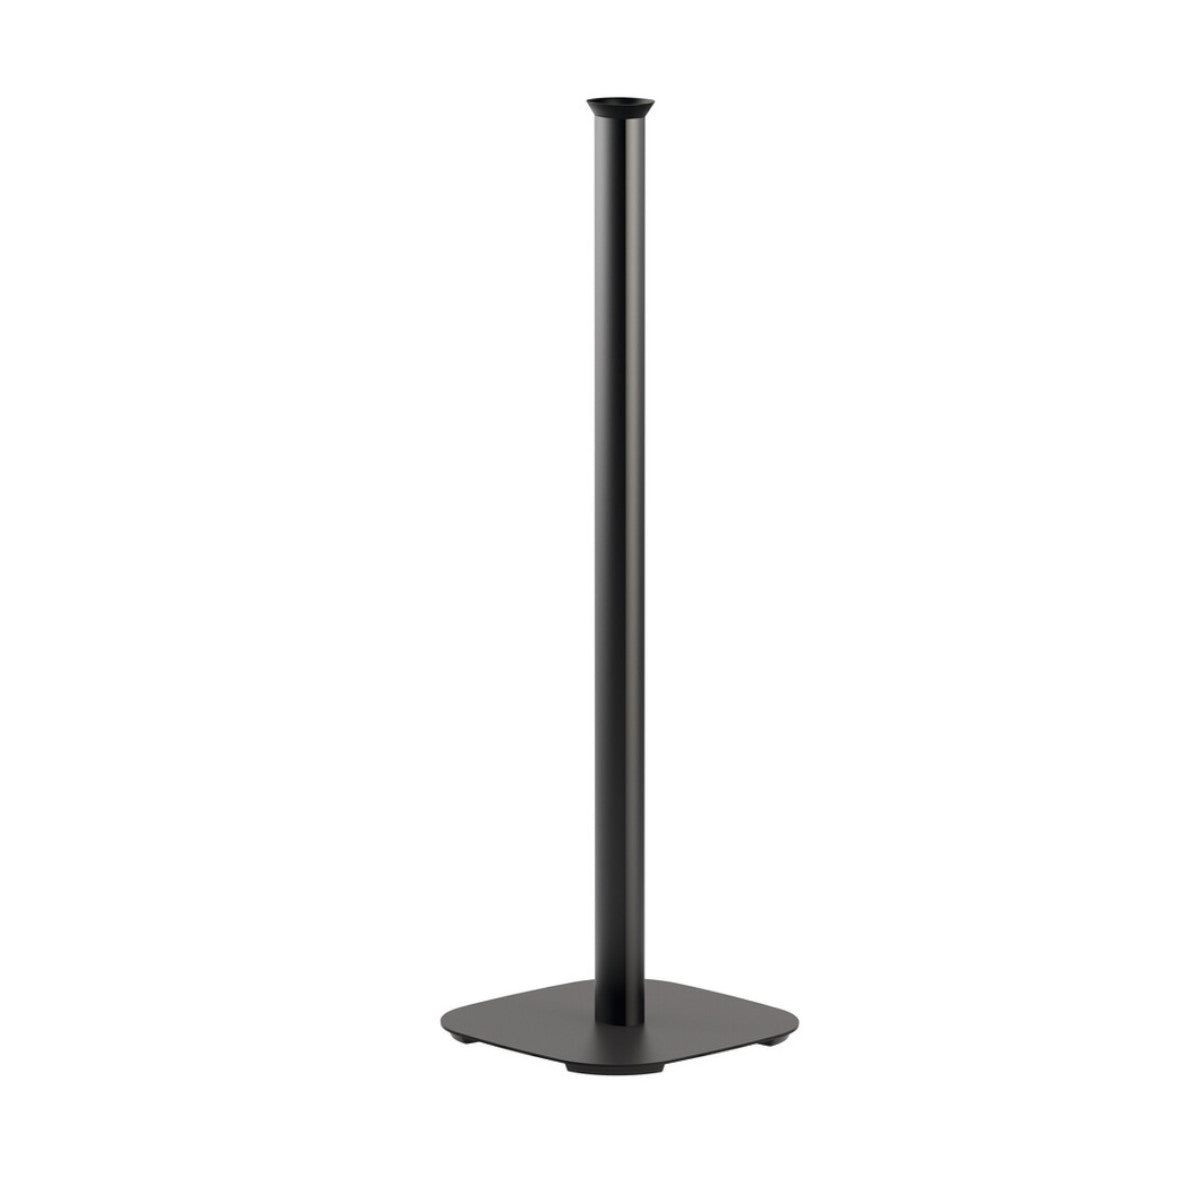 Bowers & Wilkins Formation Flex Floor Stand - Ooberpad India